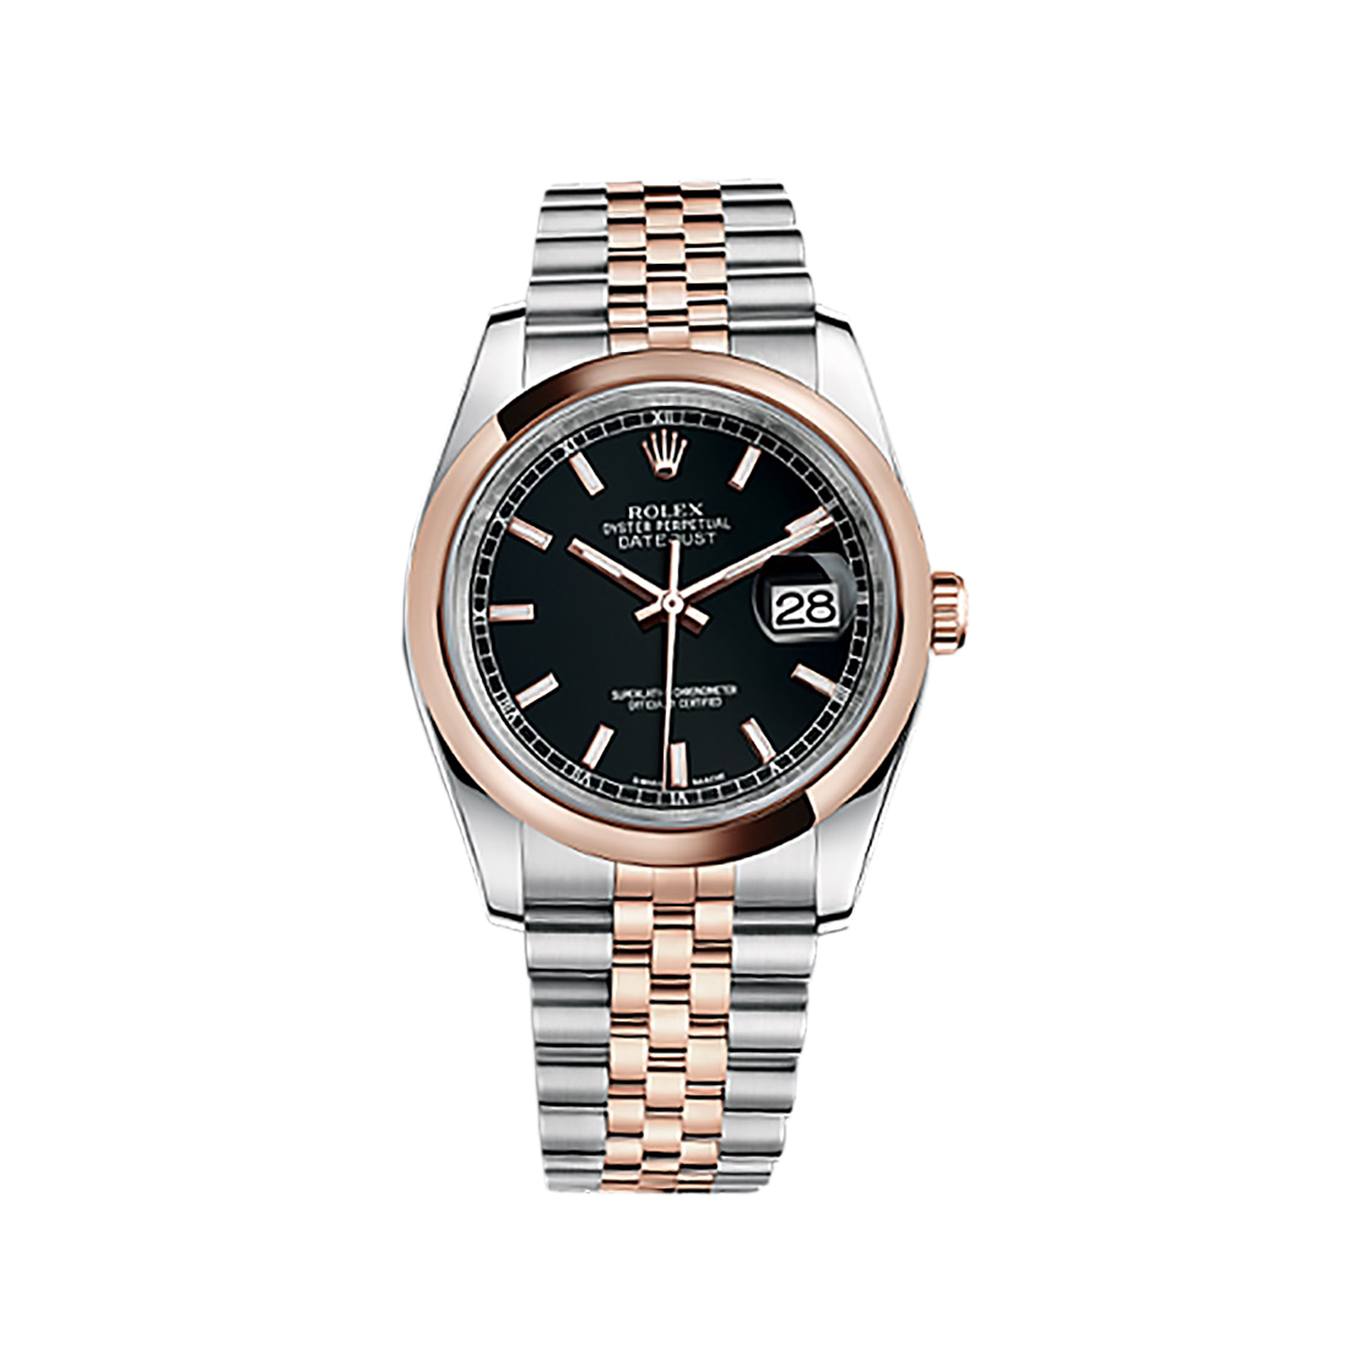 Datejust 36 116201 Rose Gold & Stainless Steel Watch (Black) - Click Image to Close